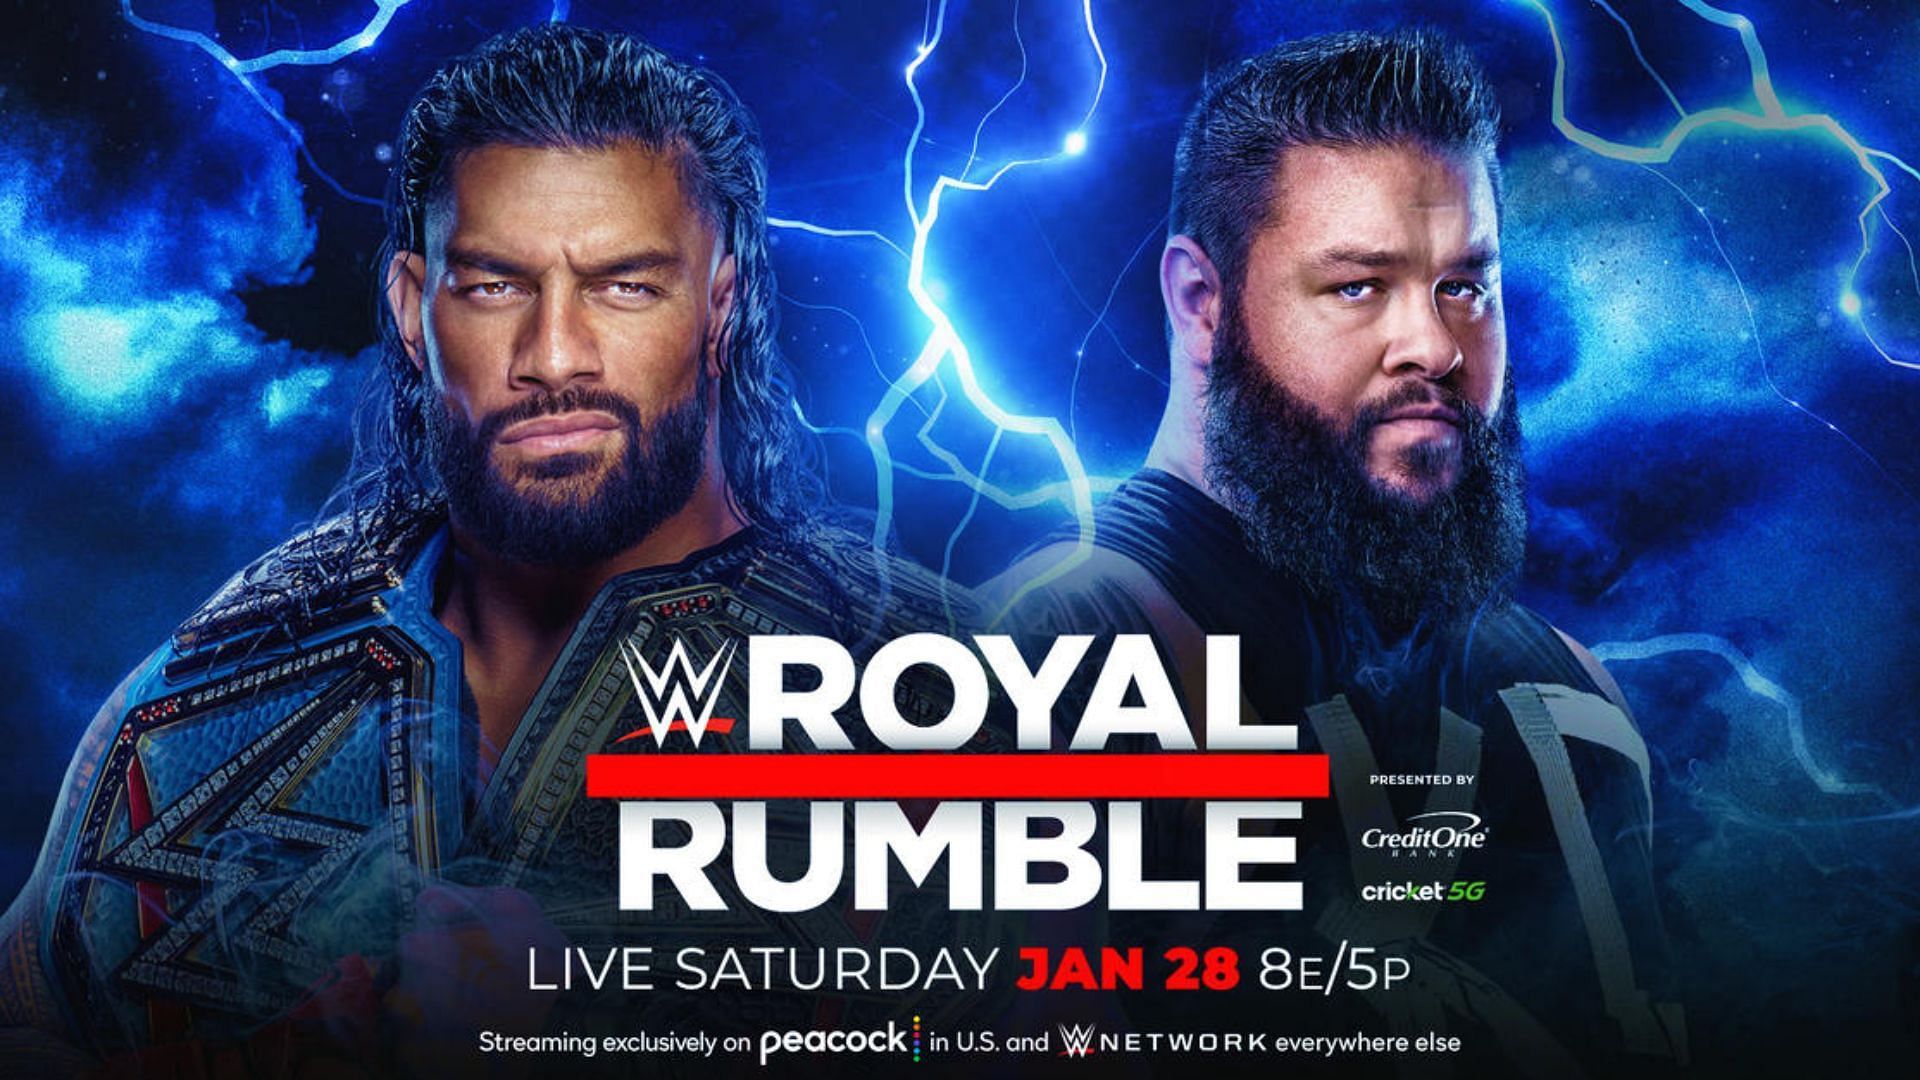 4 ways to spice up Roman Reigns vs. Kevin Owens at WWE Royal Rumble 2023